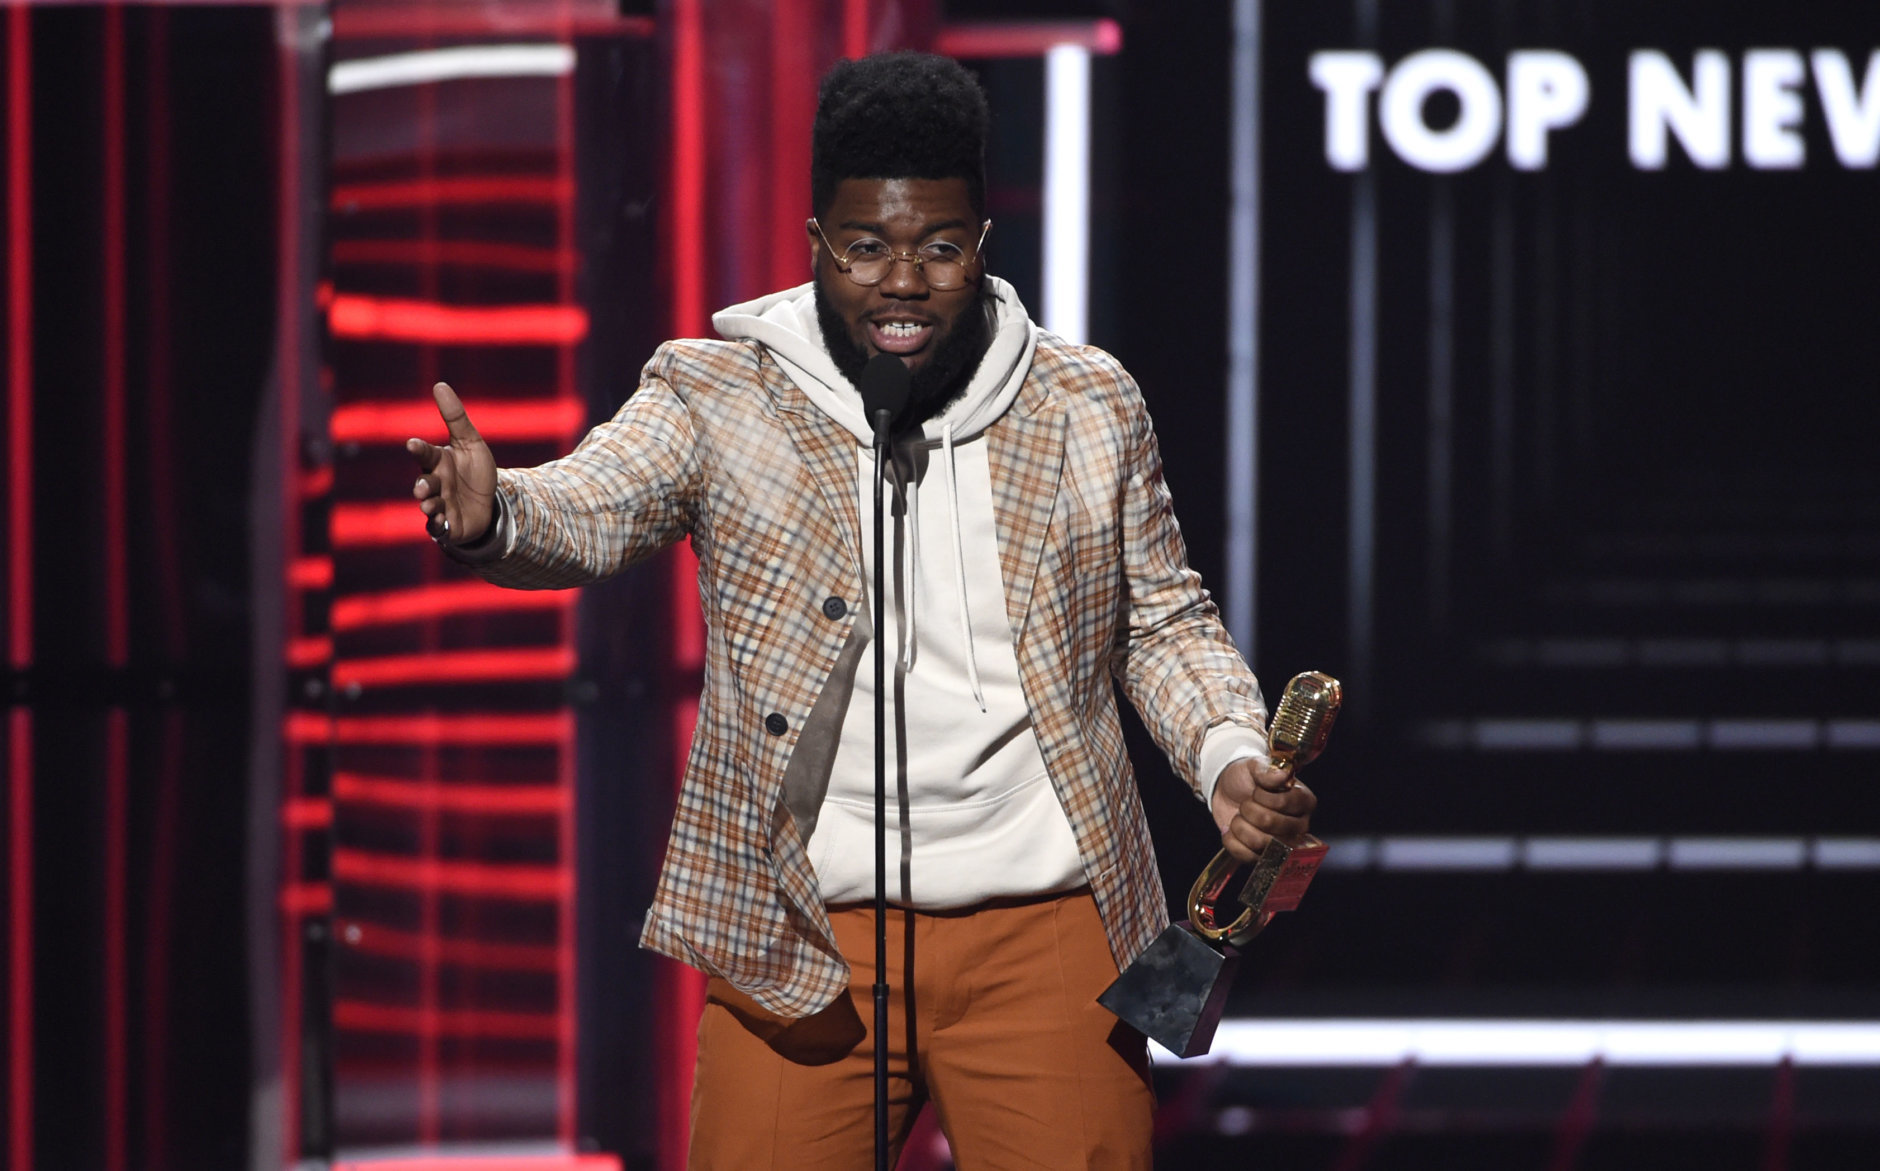 Khalid accepts the award for top new artist at the Billboard Music Awards at the MGM Grand Garden Arena on Sunday, May 20, 2018, in Las Vegas. (Photo by Chris Pizzello/Invision/AP)